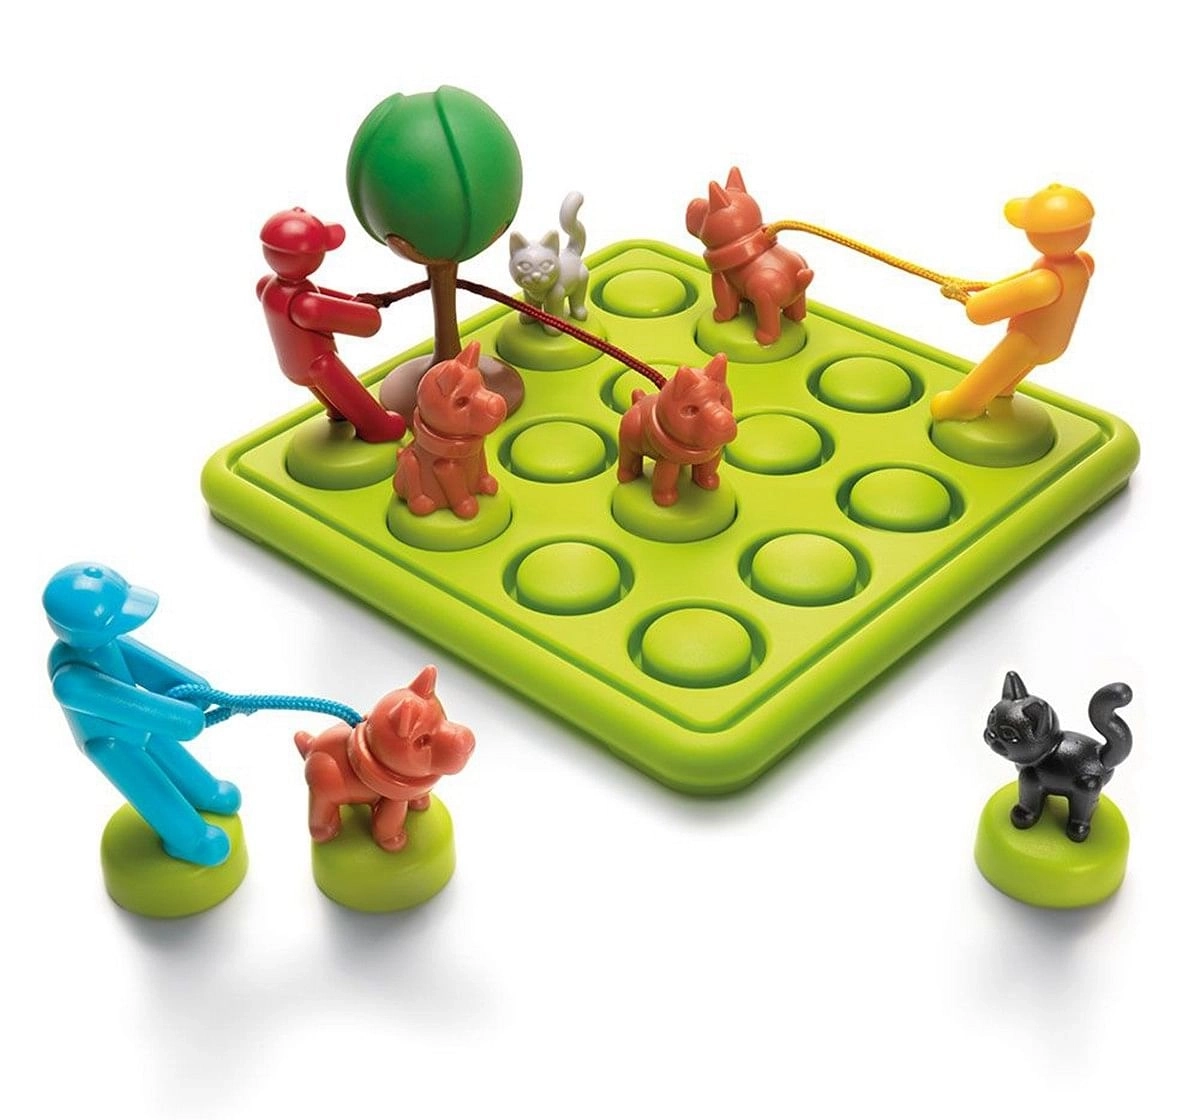 Smartgames Walk The Dog for Kids age 7Y+